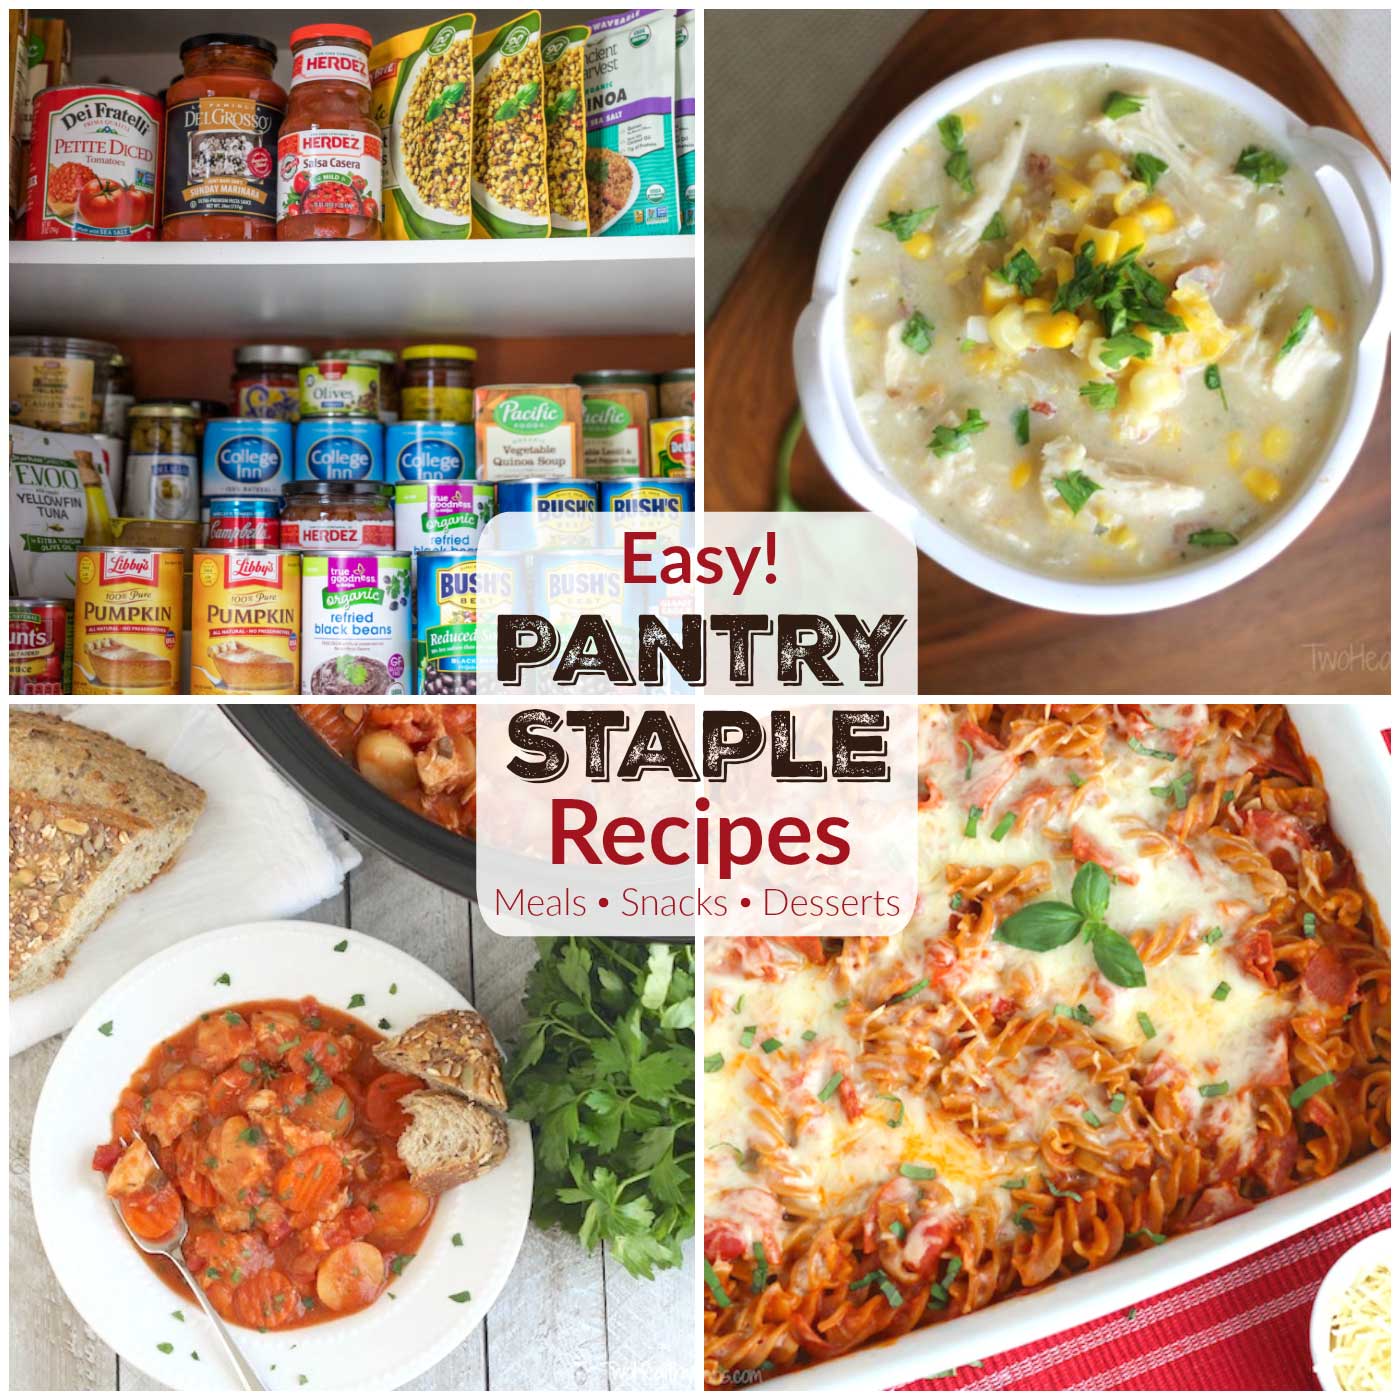 Healthy, Easy Pantry Staples Recipes